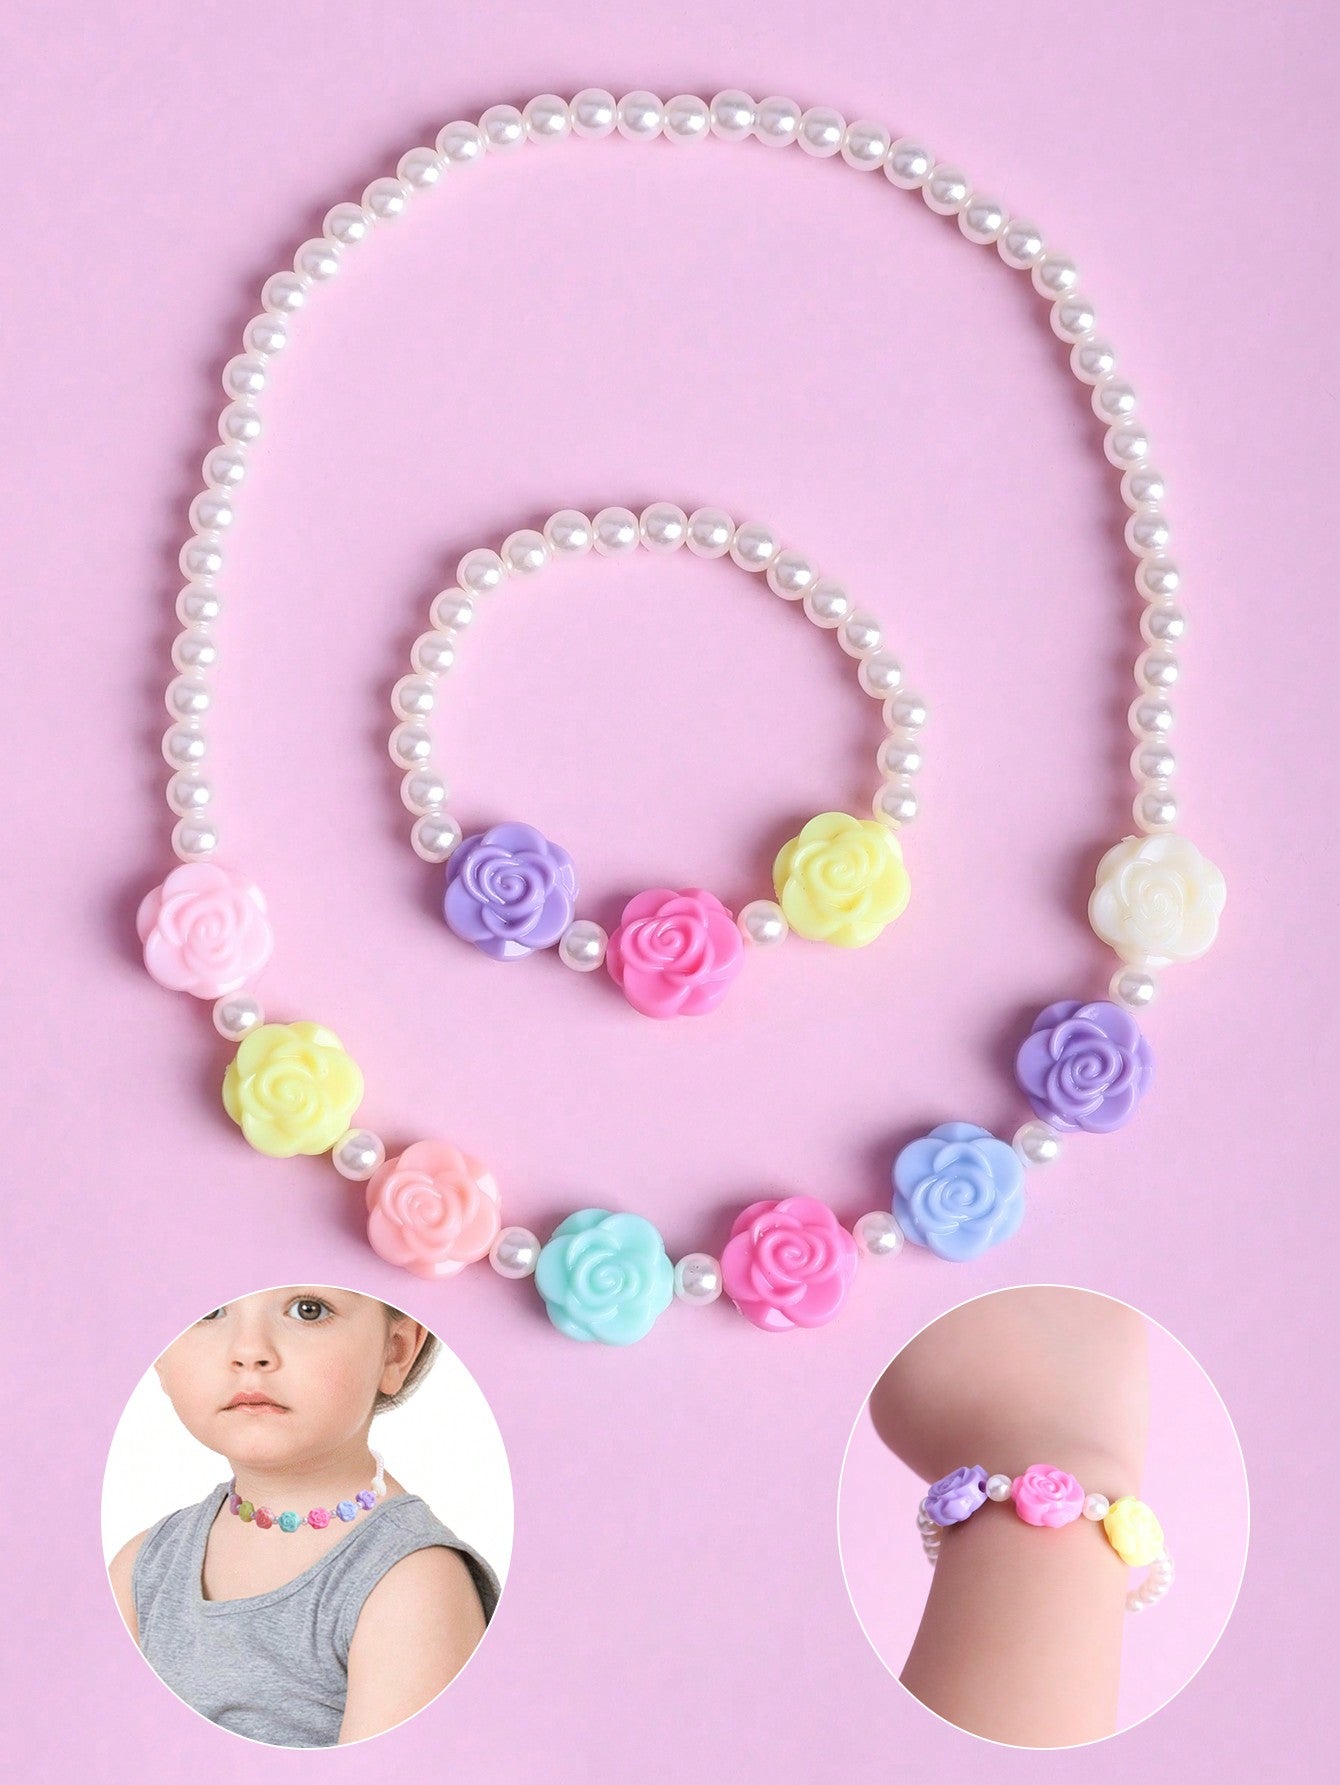 2pcs Children's Cute Rose & Pearl Beaded Bracelet & Necklace Set Suitable For Amusement Park Performance Props And Birthday Gifts